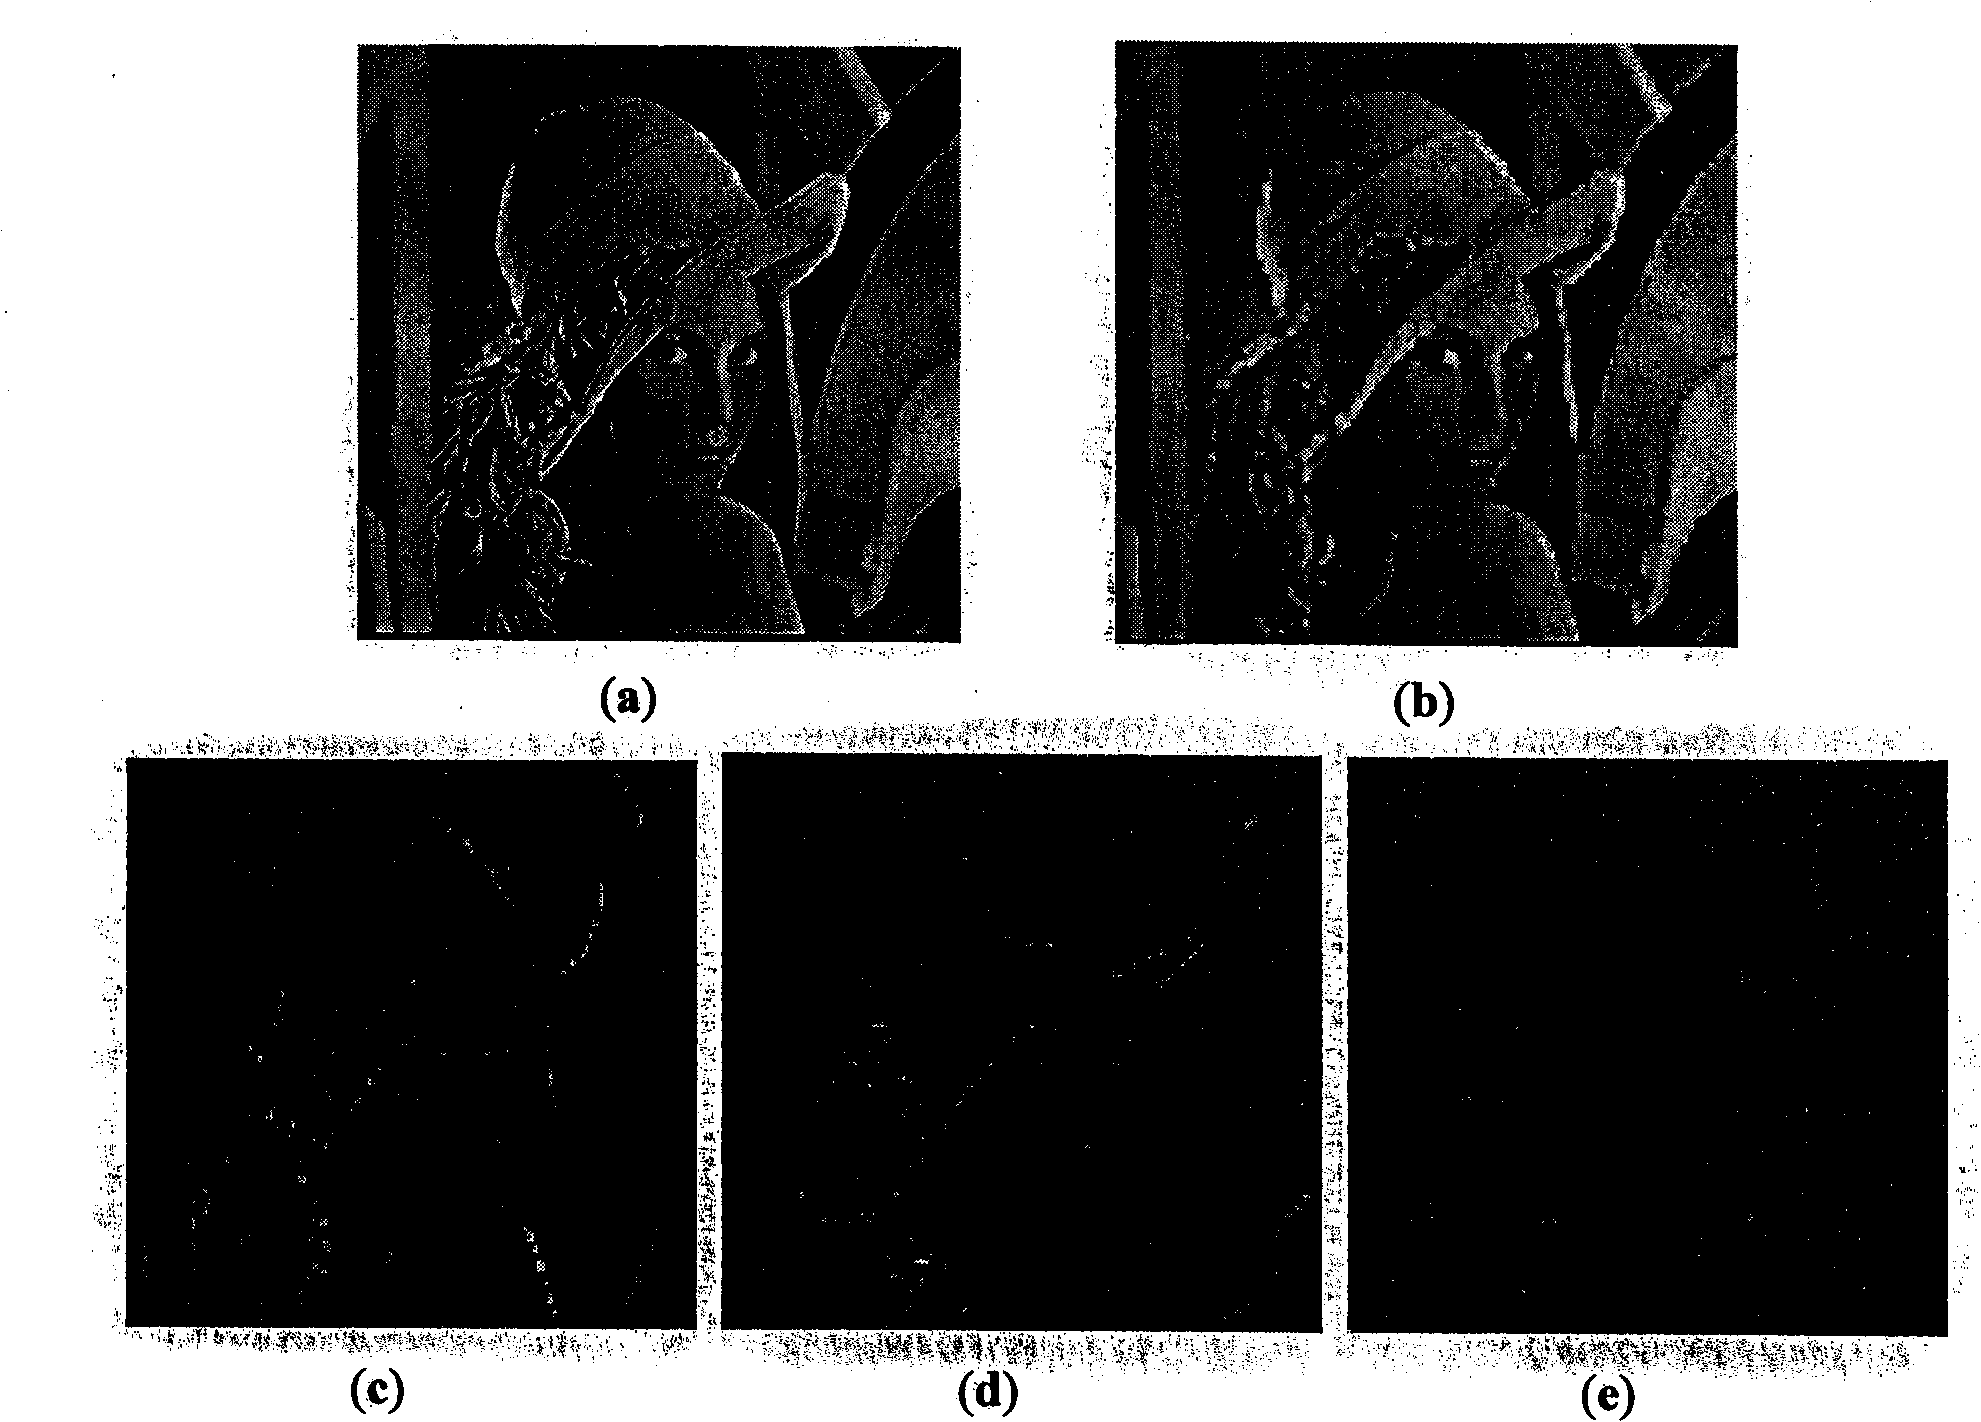 Watershed texture imaging segmenting method based on morphology Haar small wave texture gradient extraction